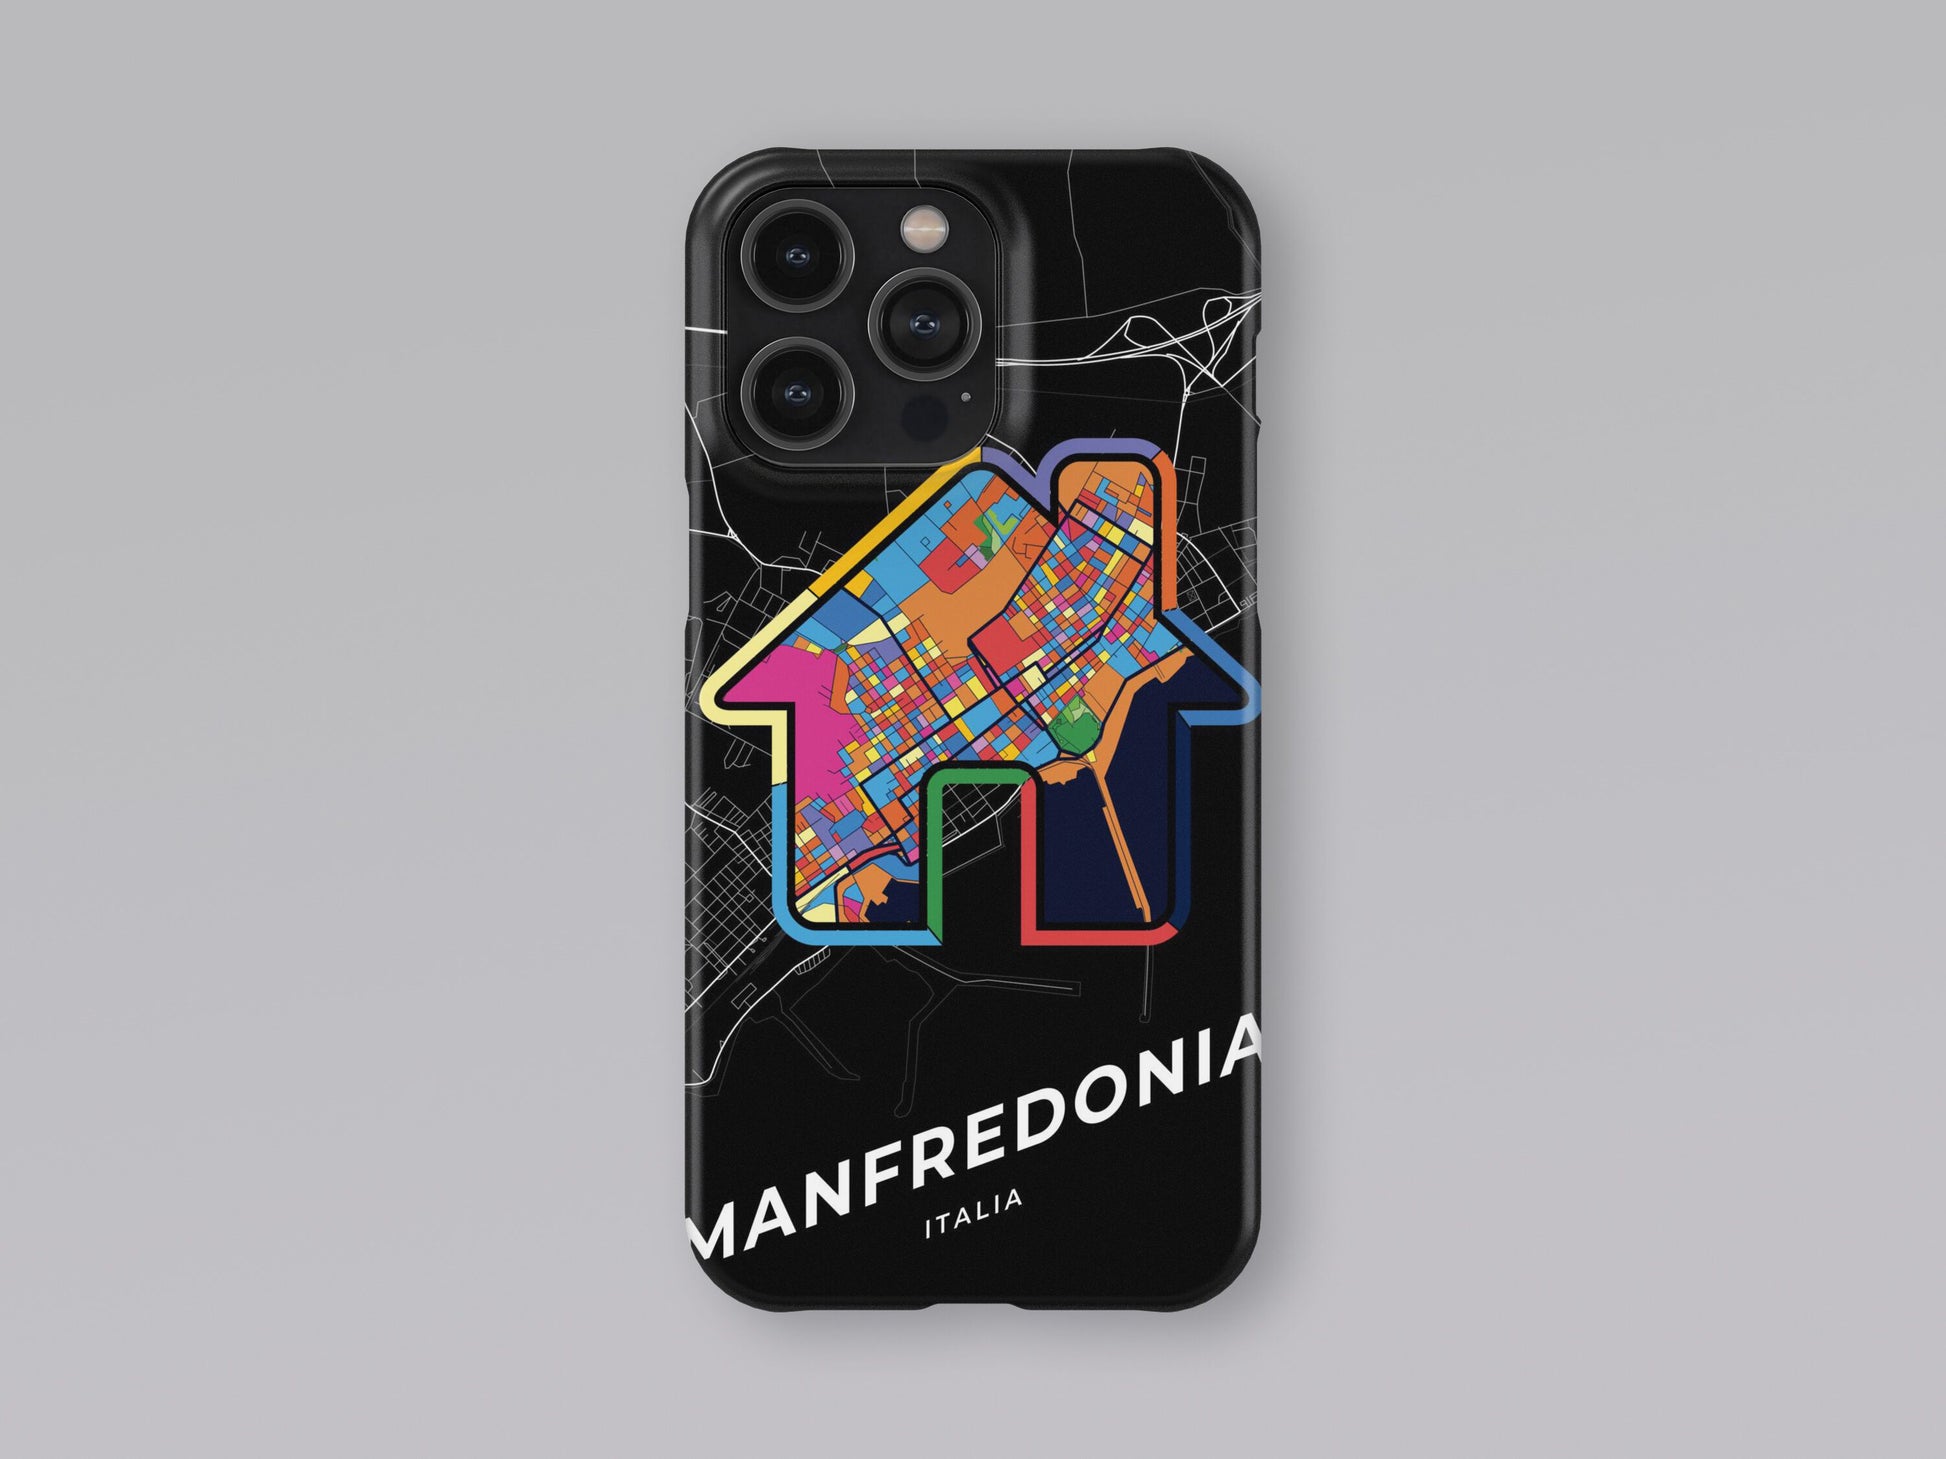 Manfredonia Italy slim phone case with colorful icon. Birthday, wedding or housewarming gift. Couple match cases. 3